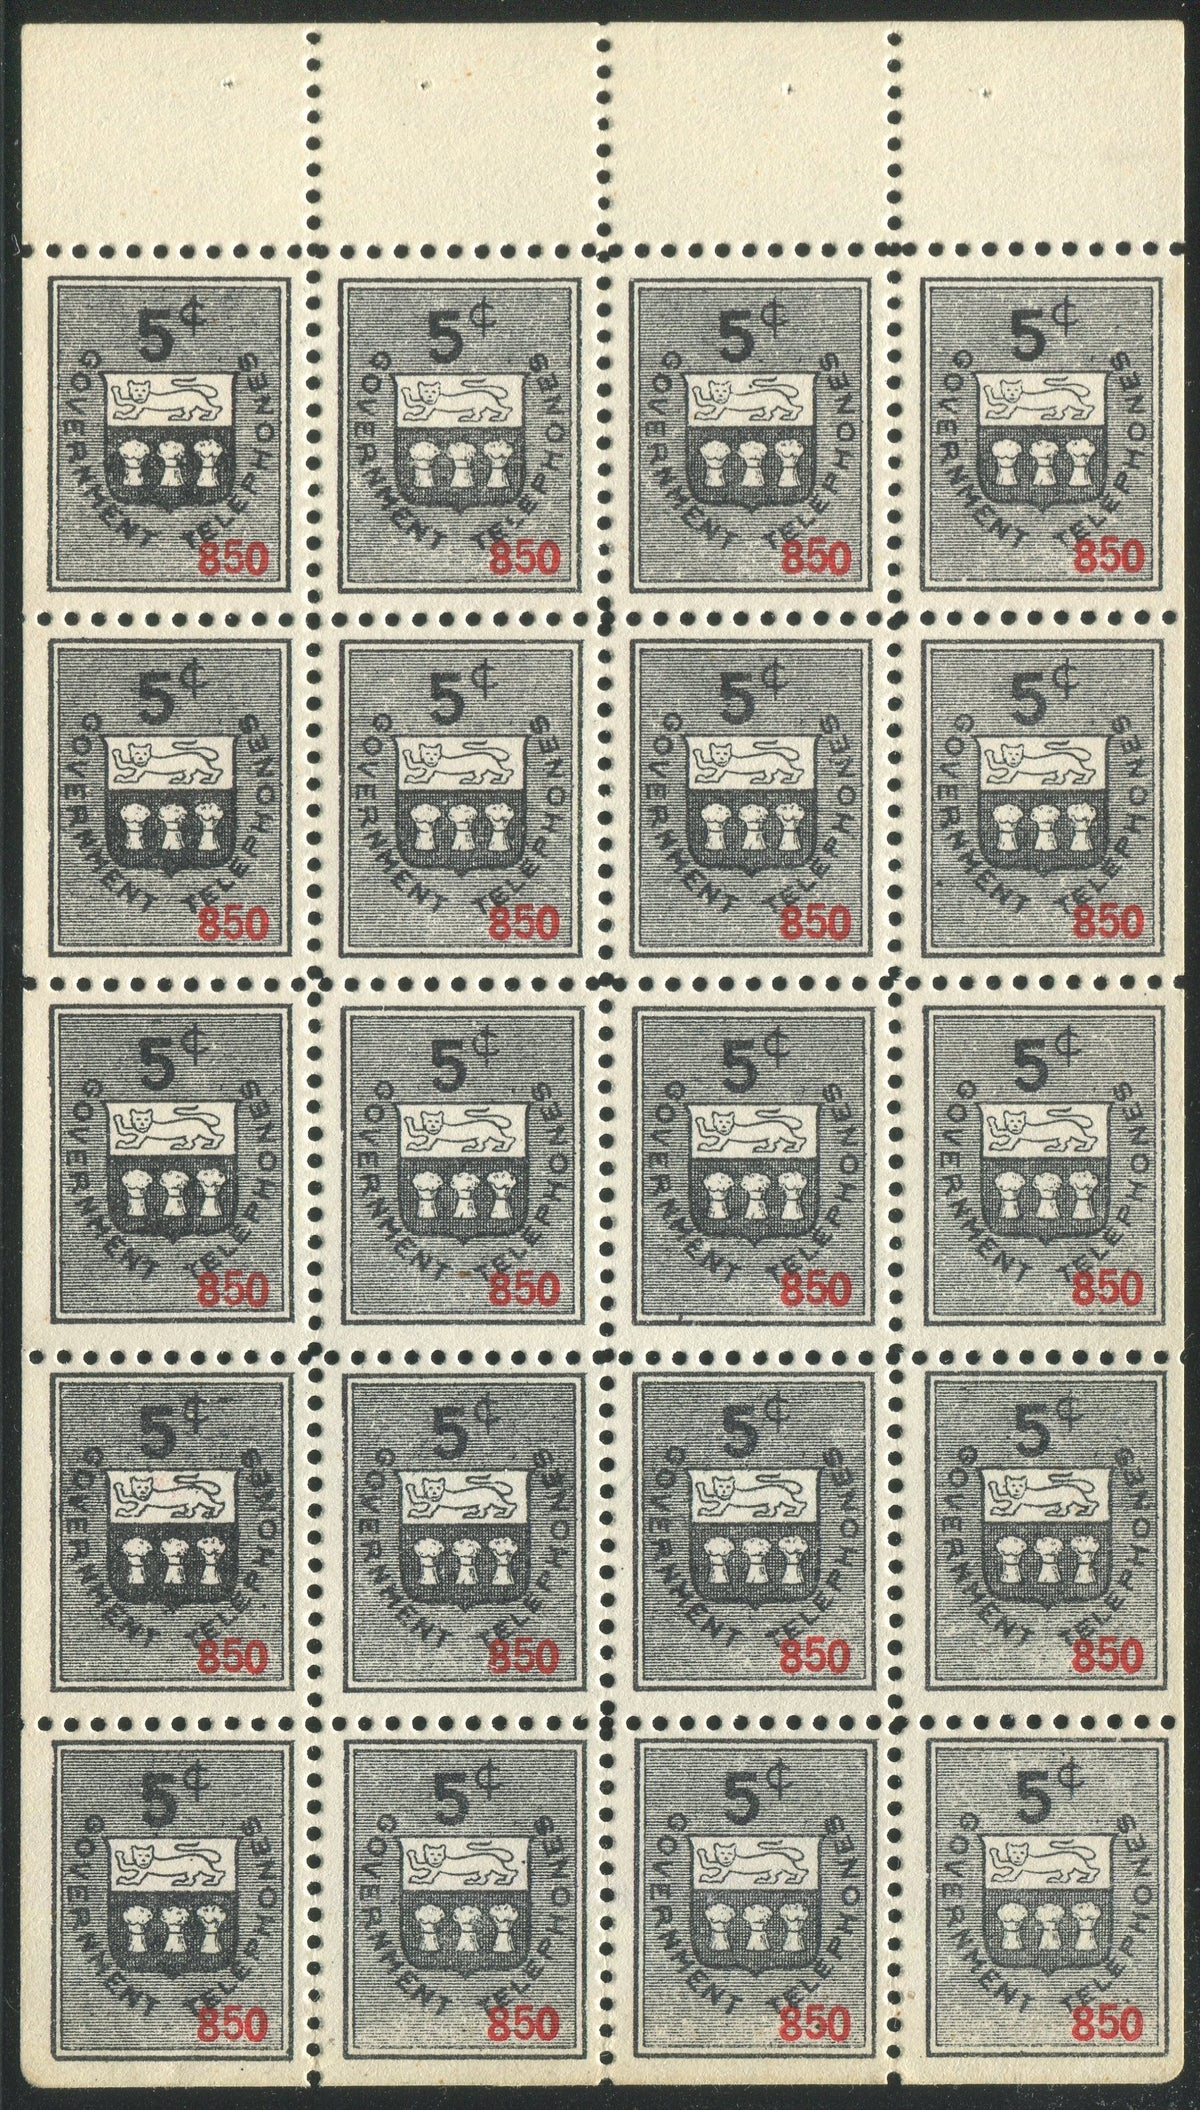 0122ST2011 - ST14f - Mint Booklet Pane, Watermarked